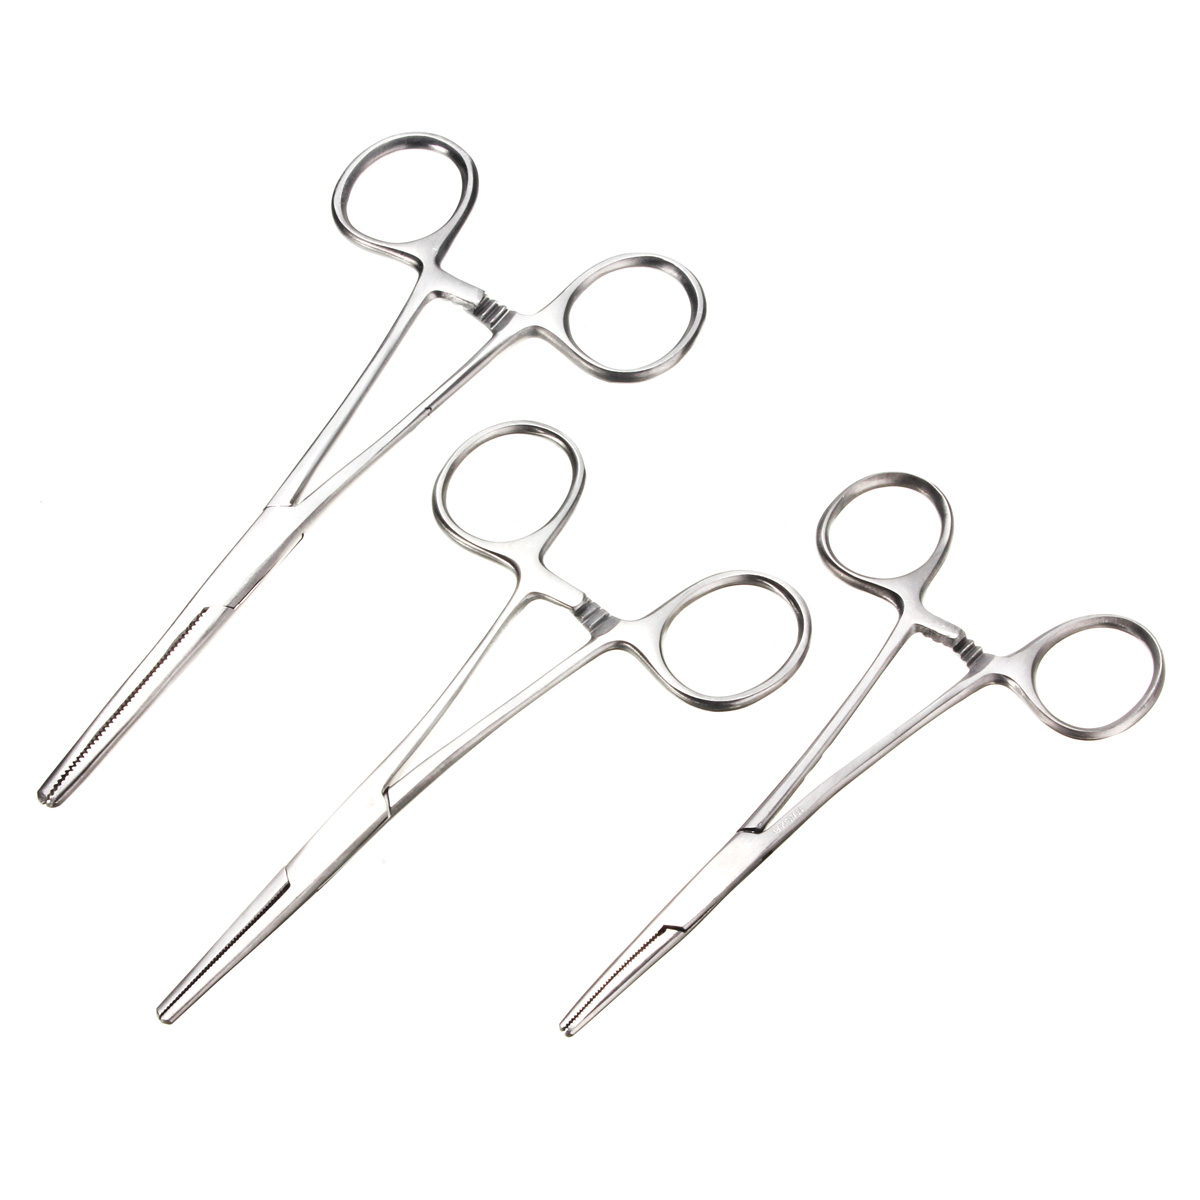 Hemostat-Forceps-Straight-Curved-Stainless-Steel-Locking-Clamp-1039903-2